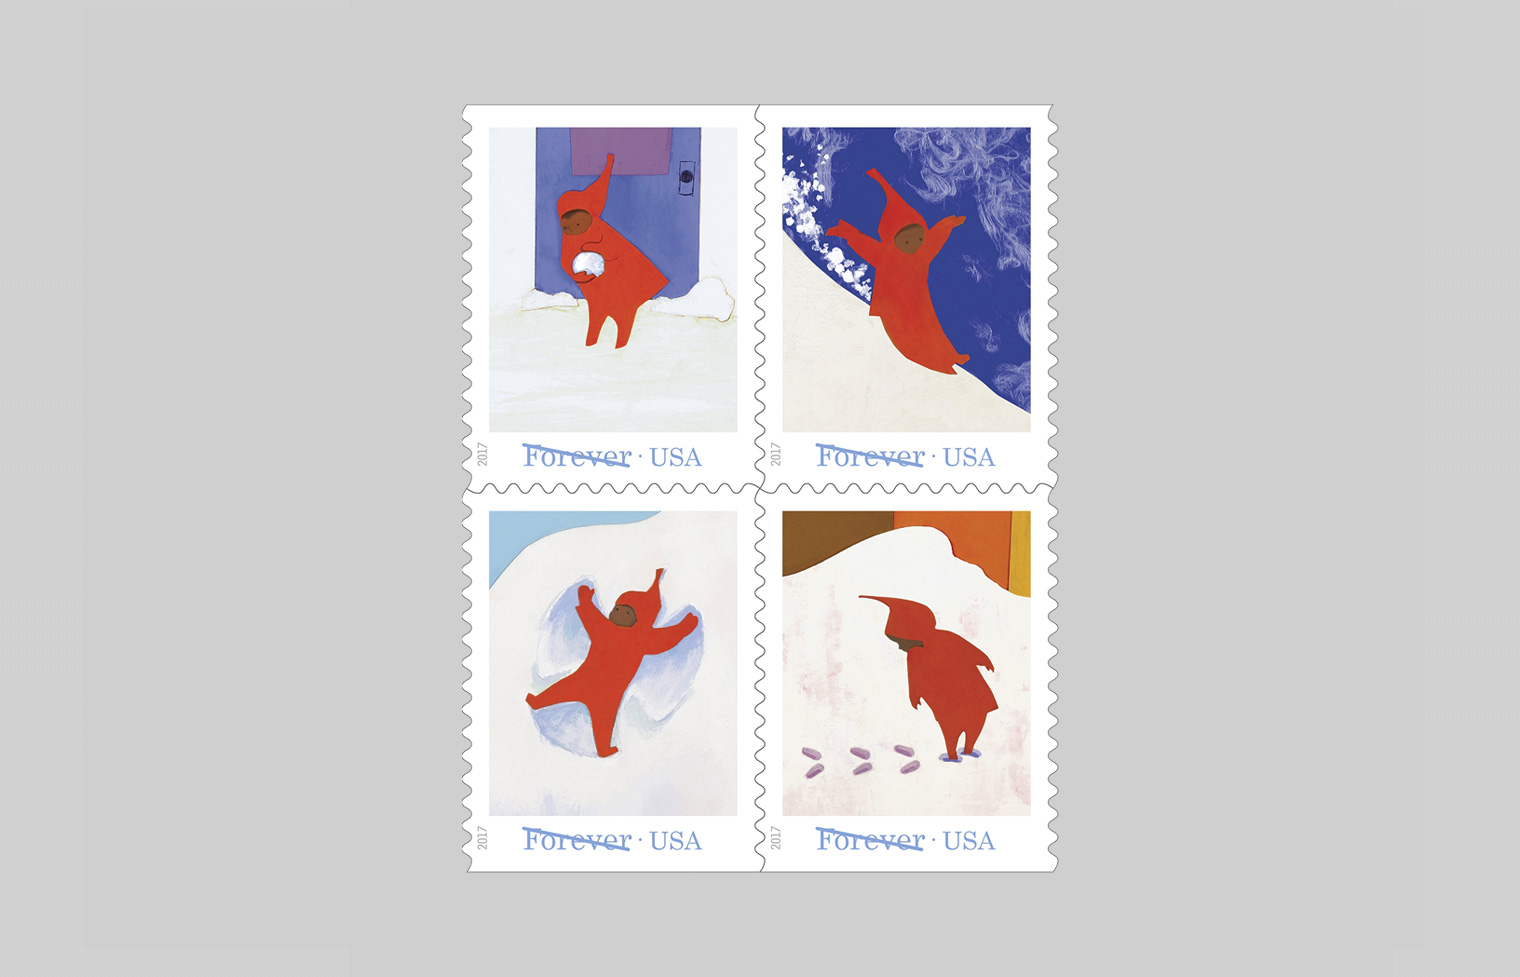 The Snowy Day Stamp